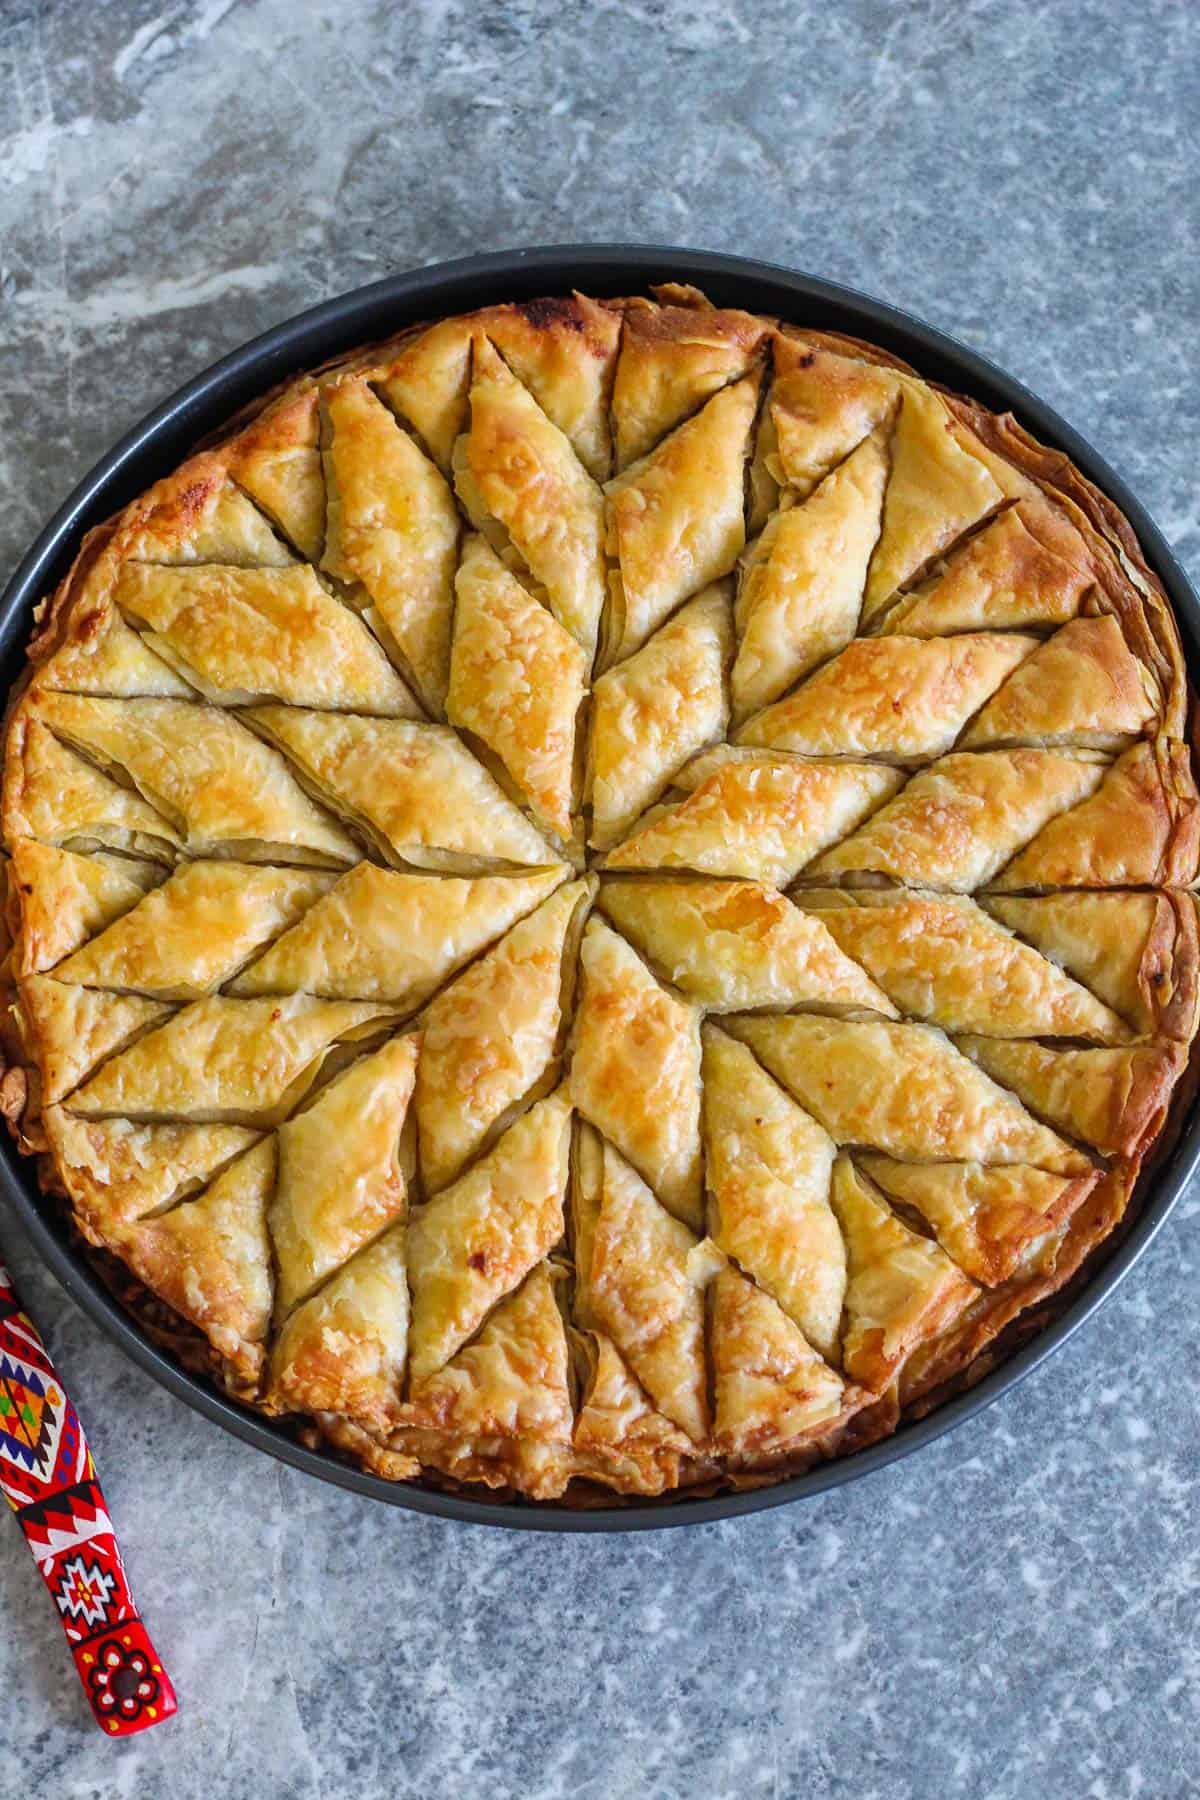 Homemade baklava from scratch, already baked and cut in the traditional rhombus shape. Baklava is shown on a round baking tray.